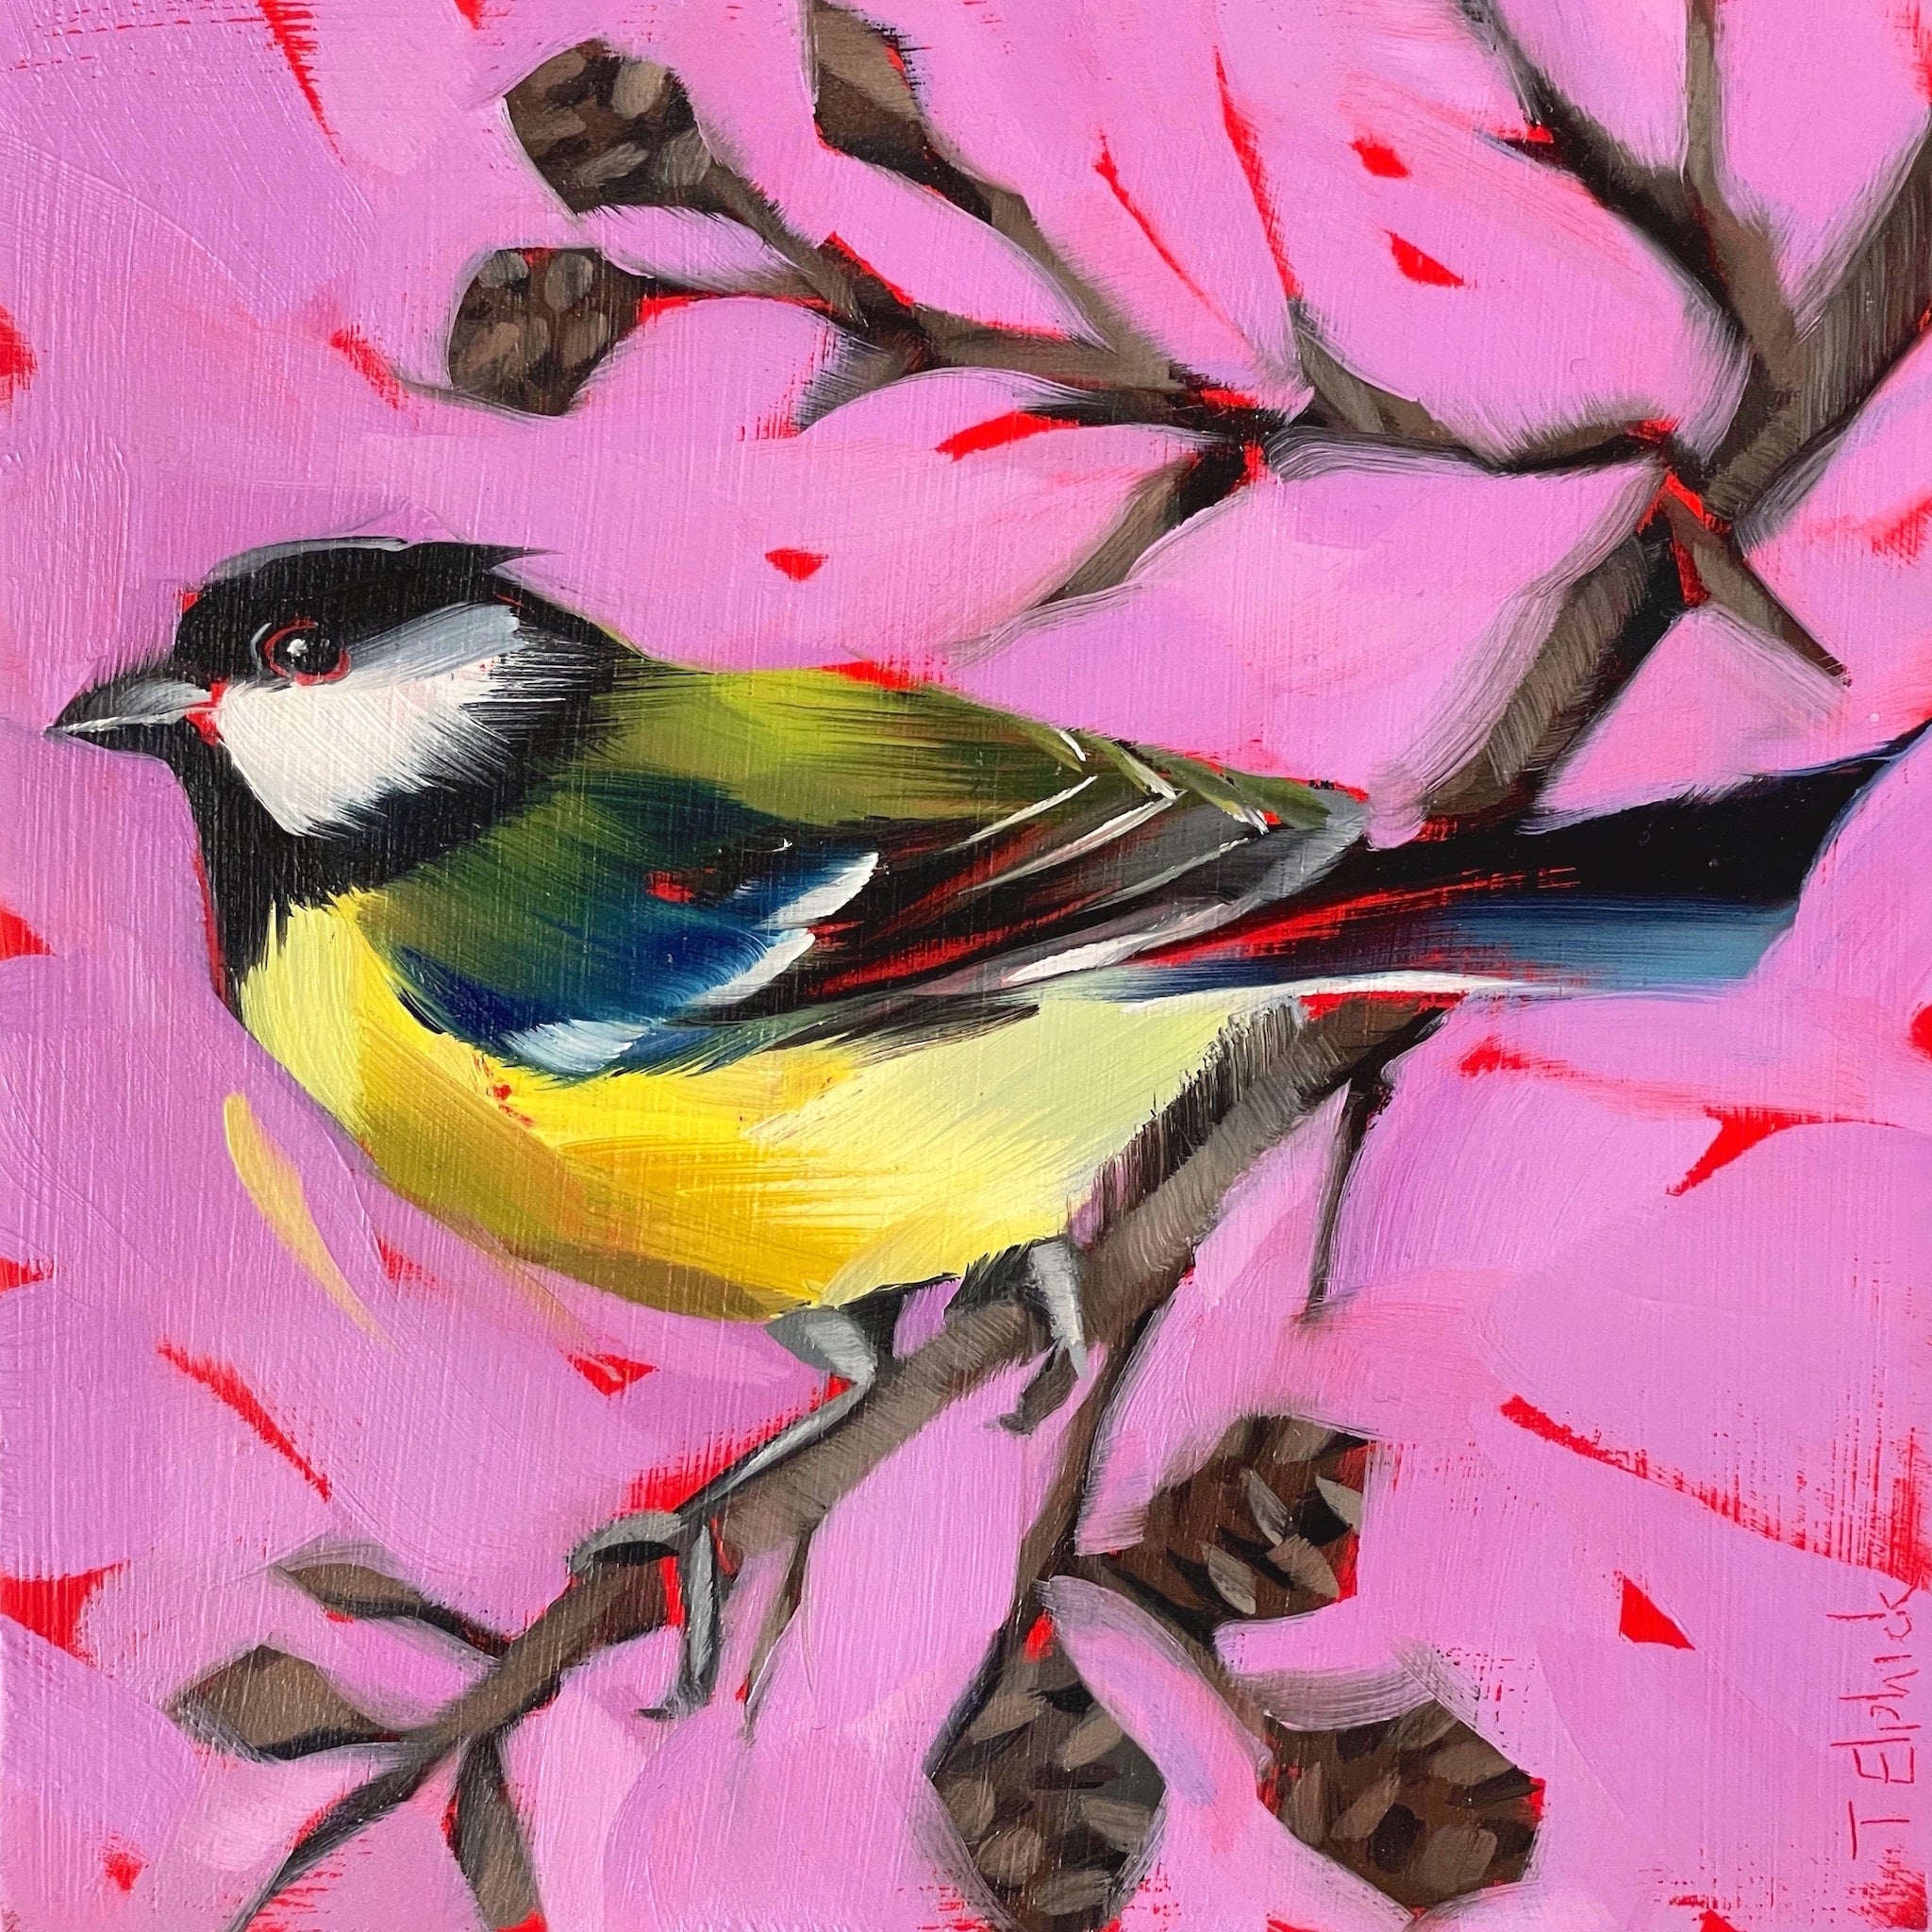 Painting of a Great Tit by artist Tracey Elphick